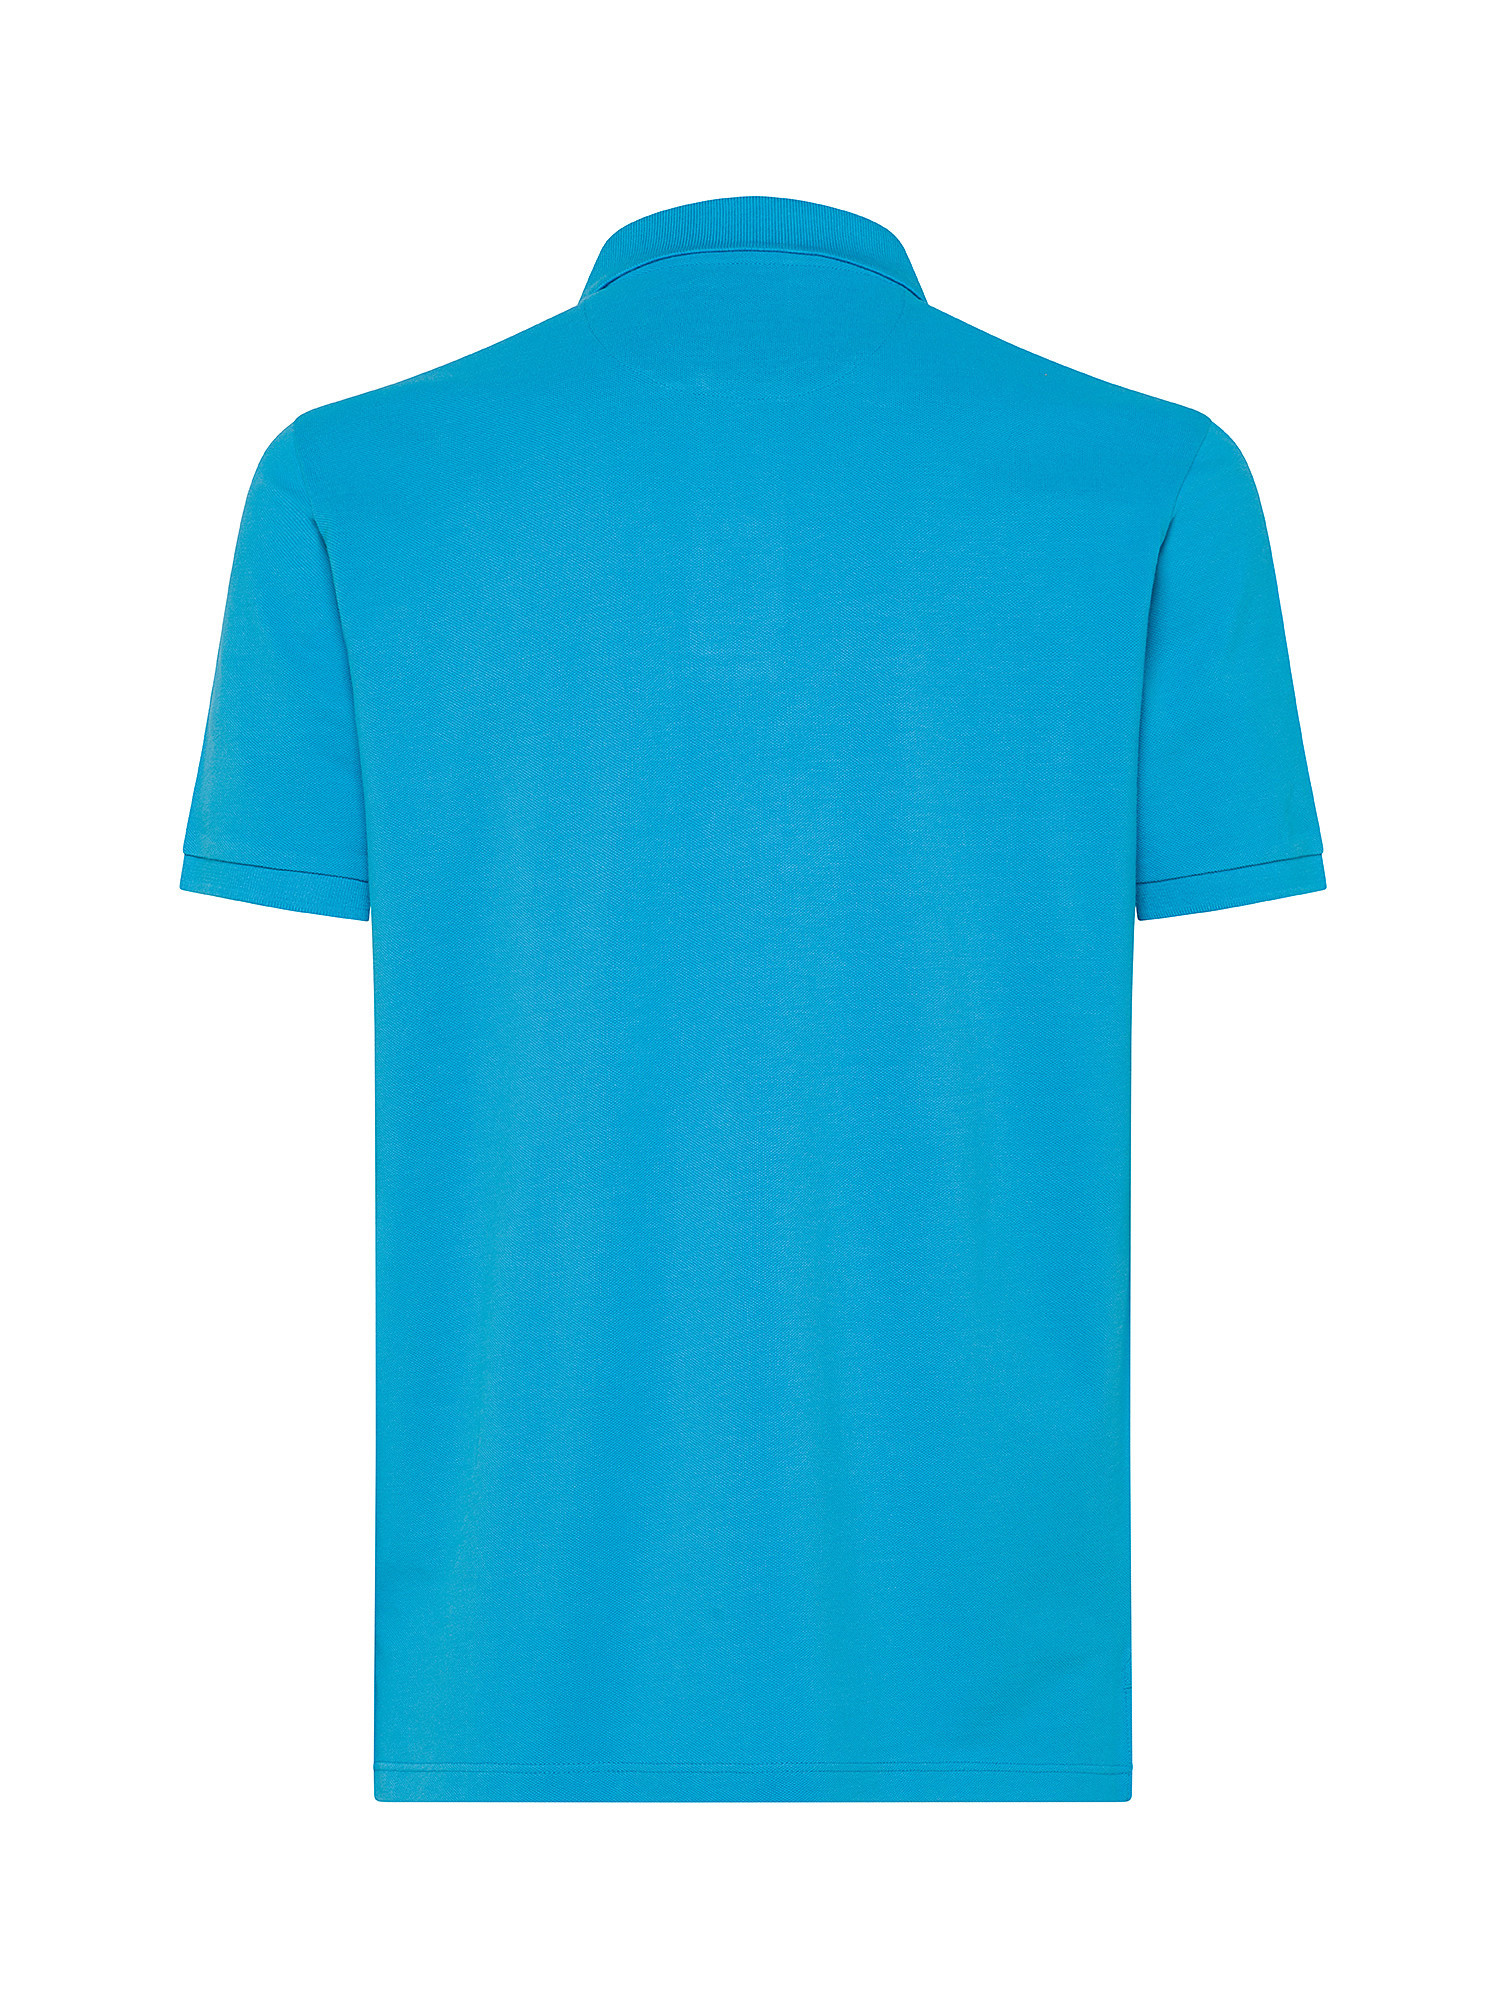 Luca D'Altieri - Polo in pure cotton, Turquoise, large image number 1